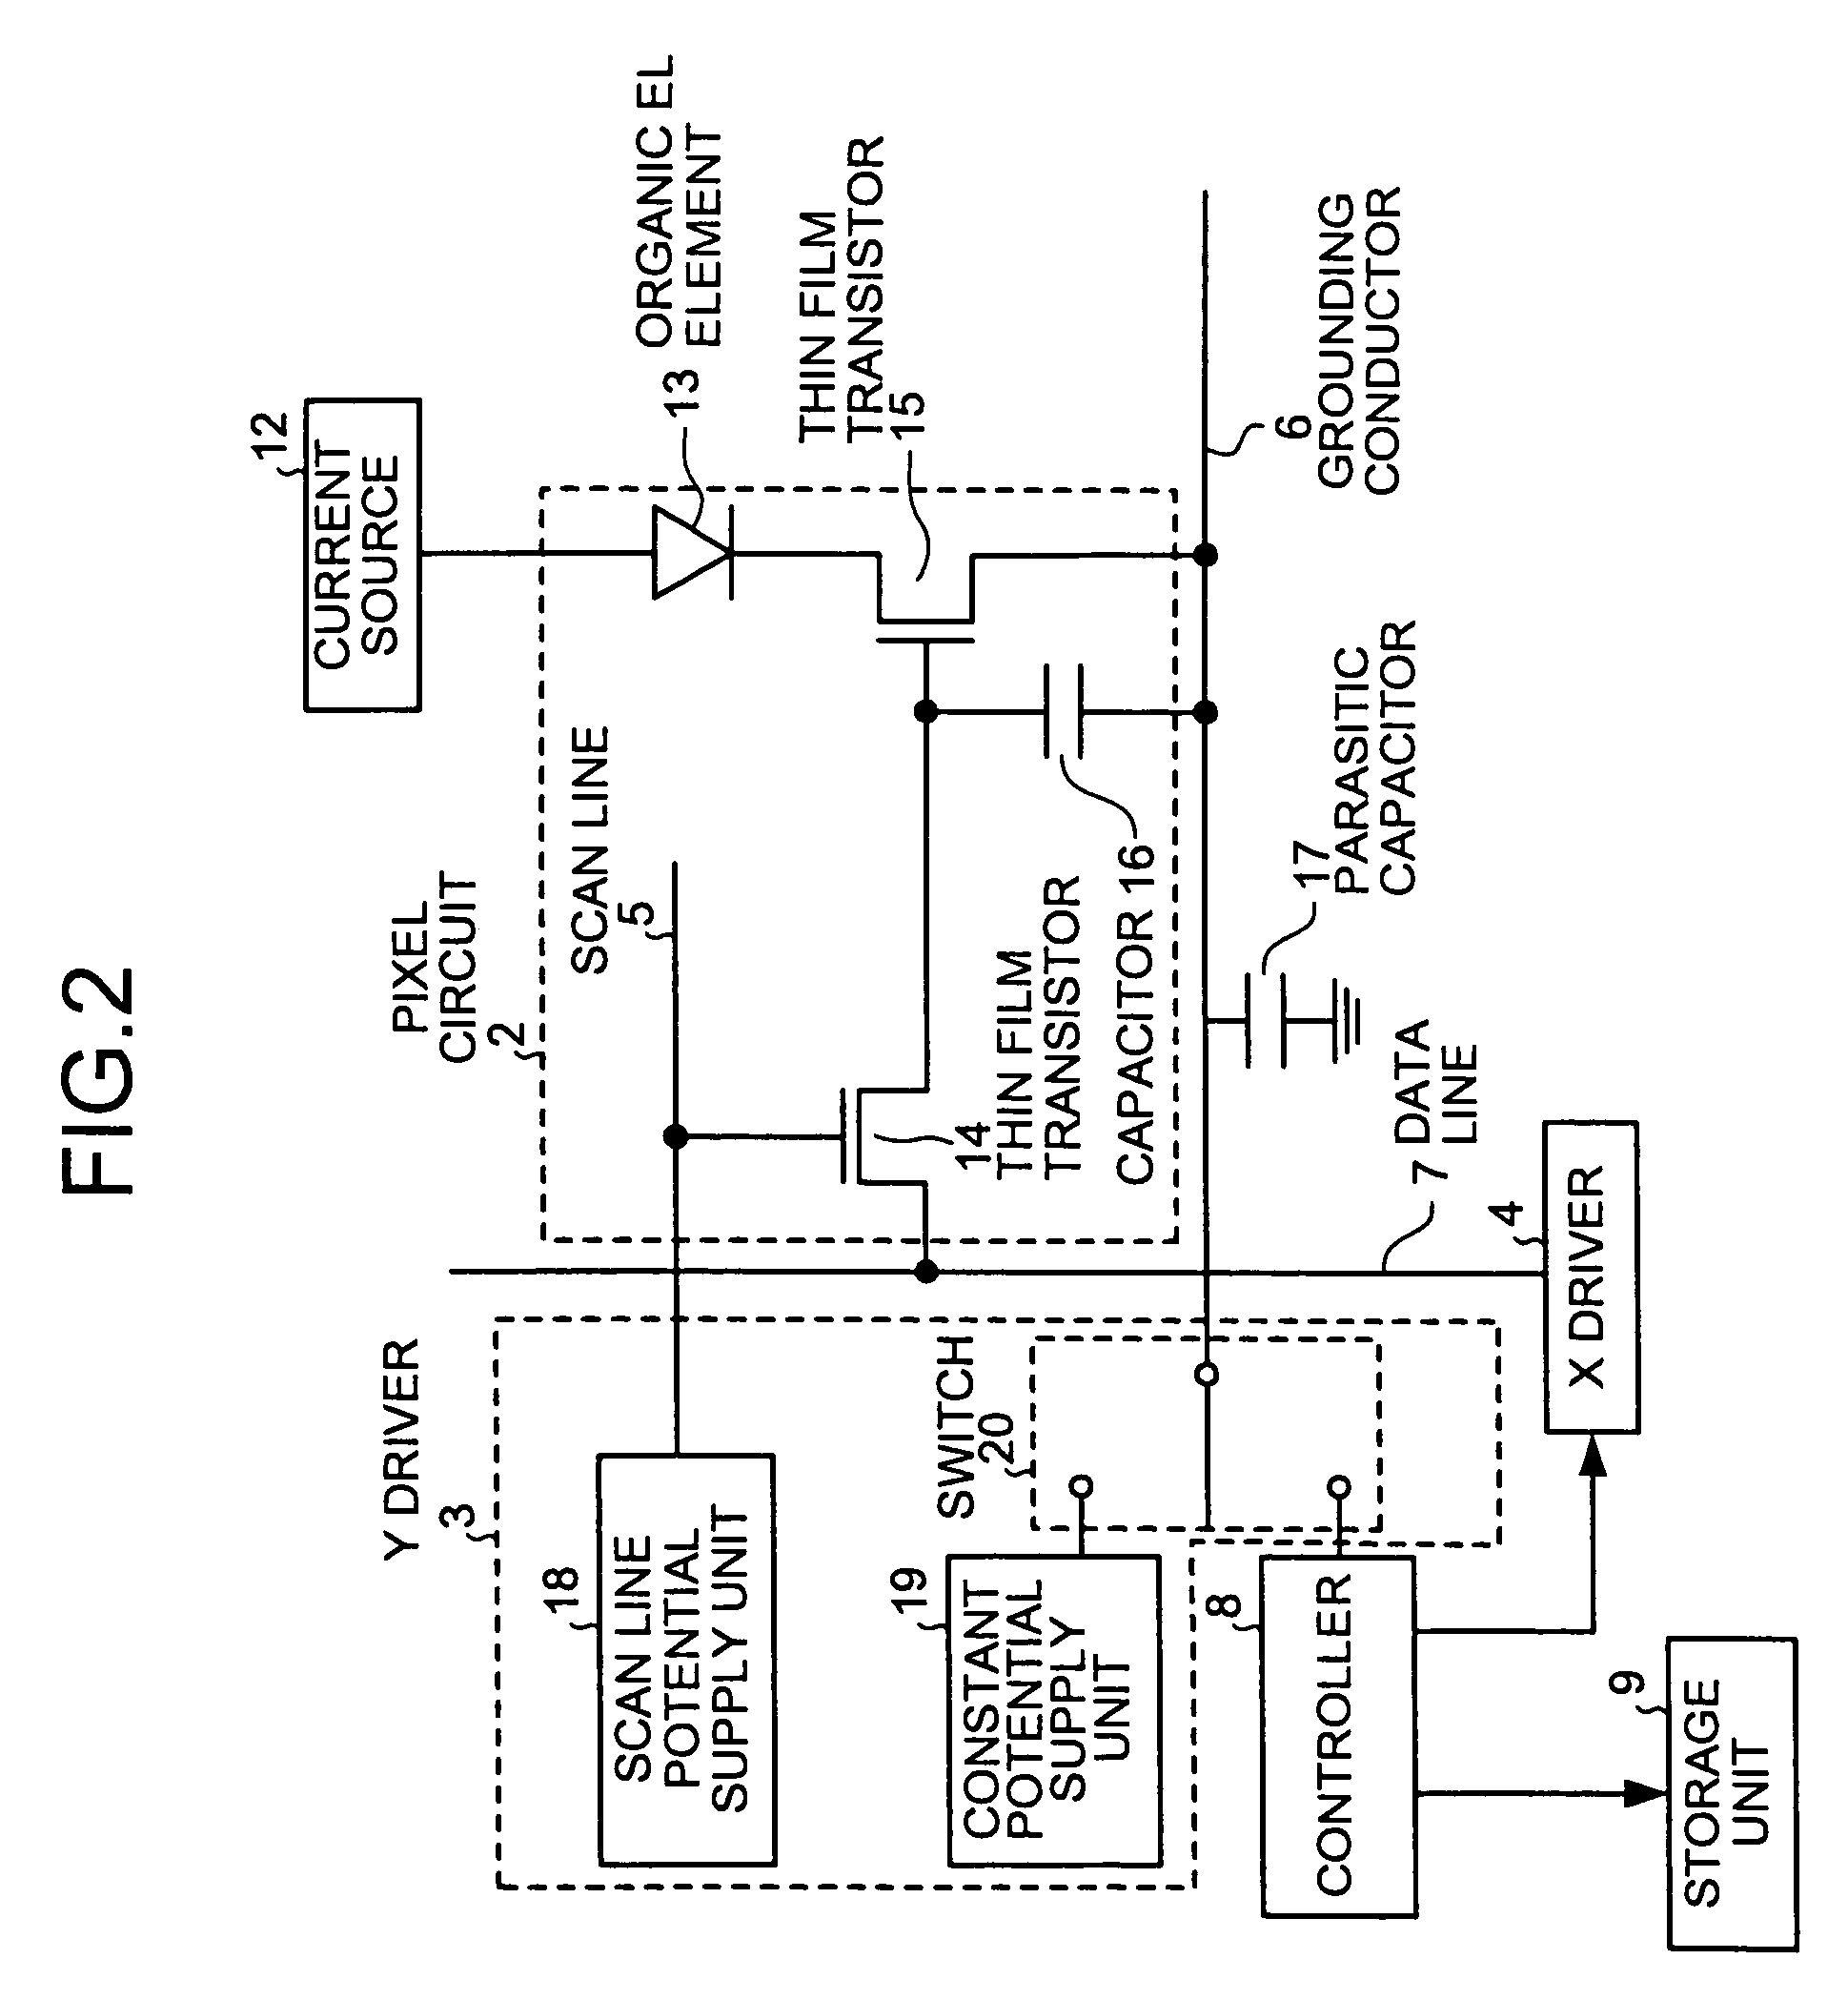 Image display apparatus using current-controlled light emitting element